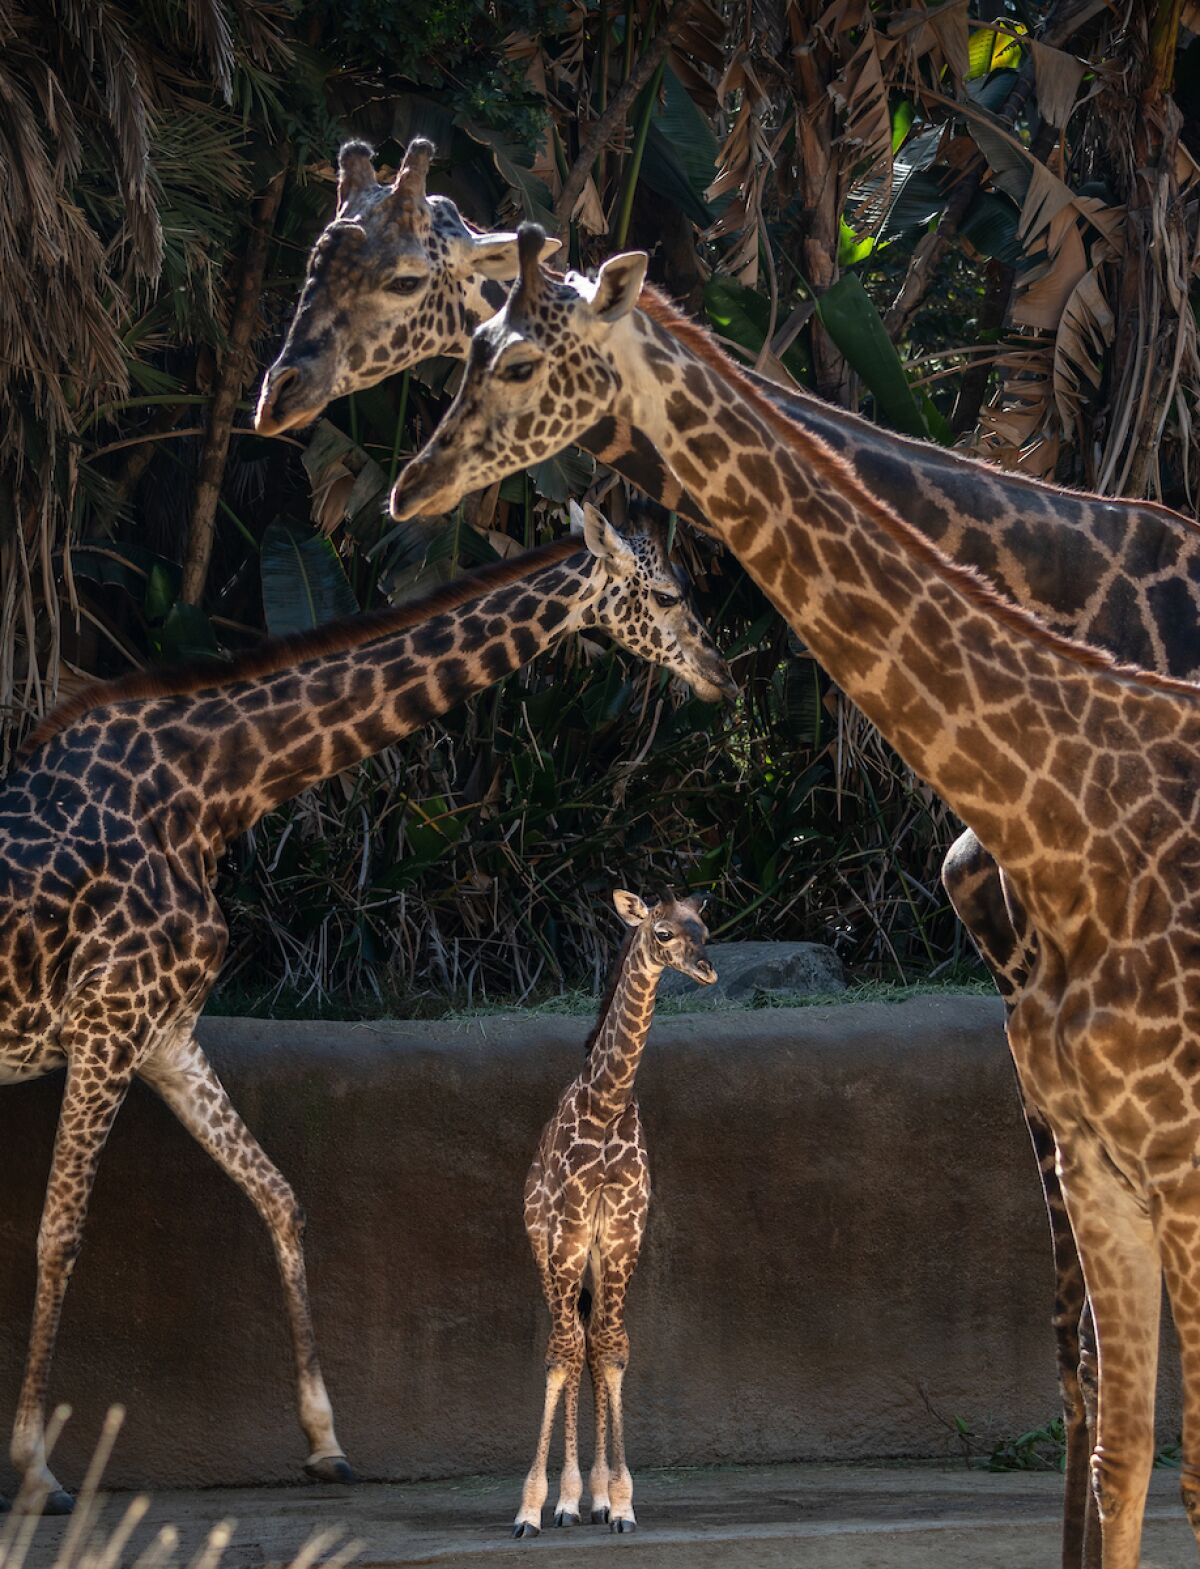 The baby giraffe is currently on display at the L.A. Zoo.